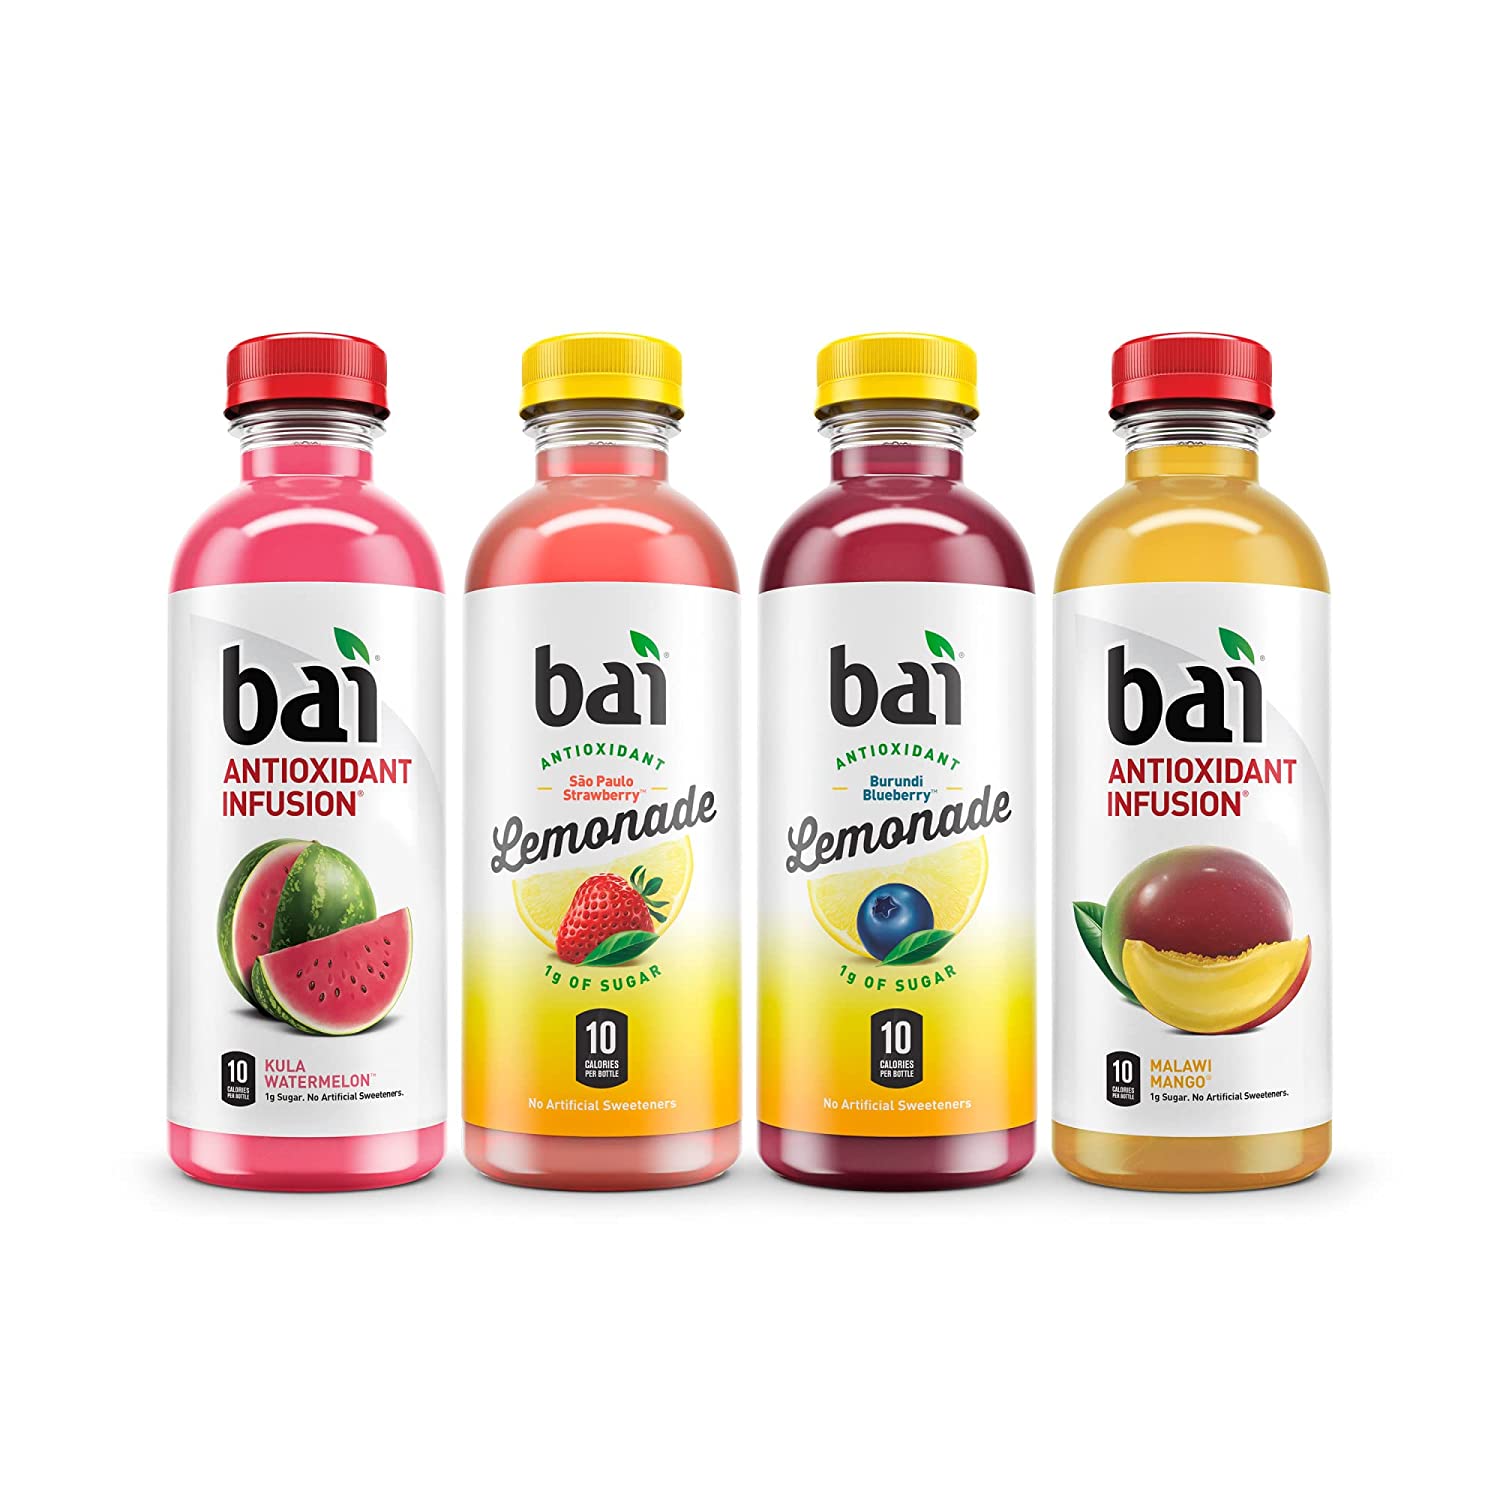 Bai Gluten-Free, Mountainside Variety Pack, Antioxidant Infused